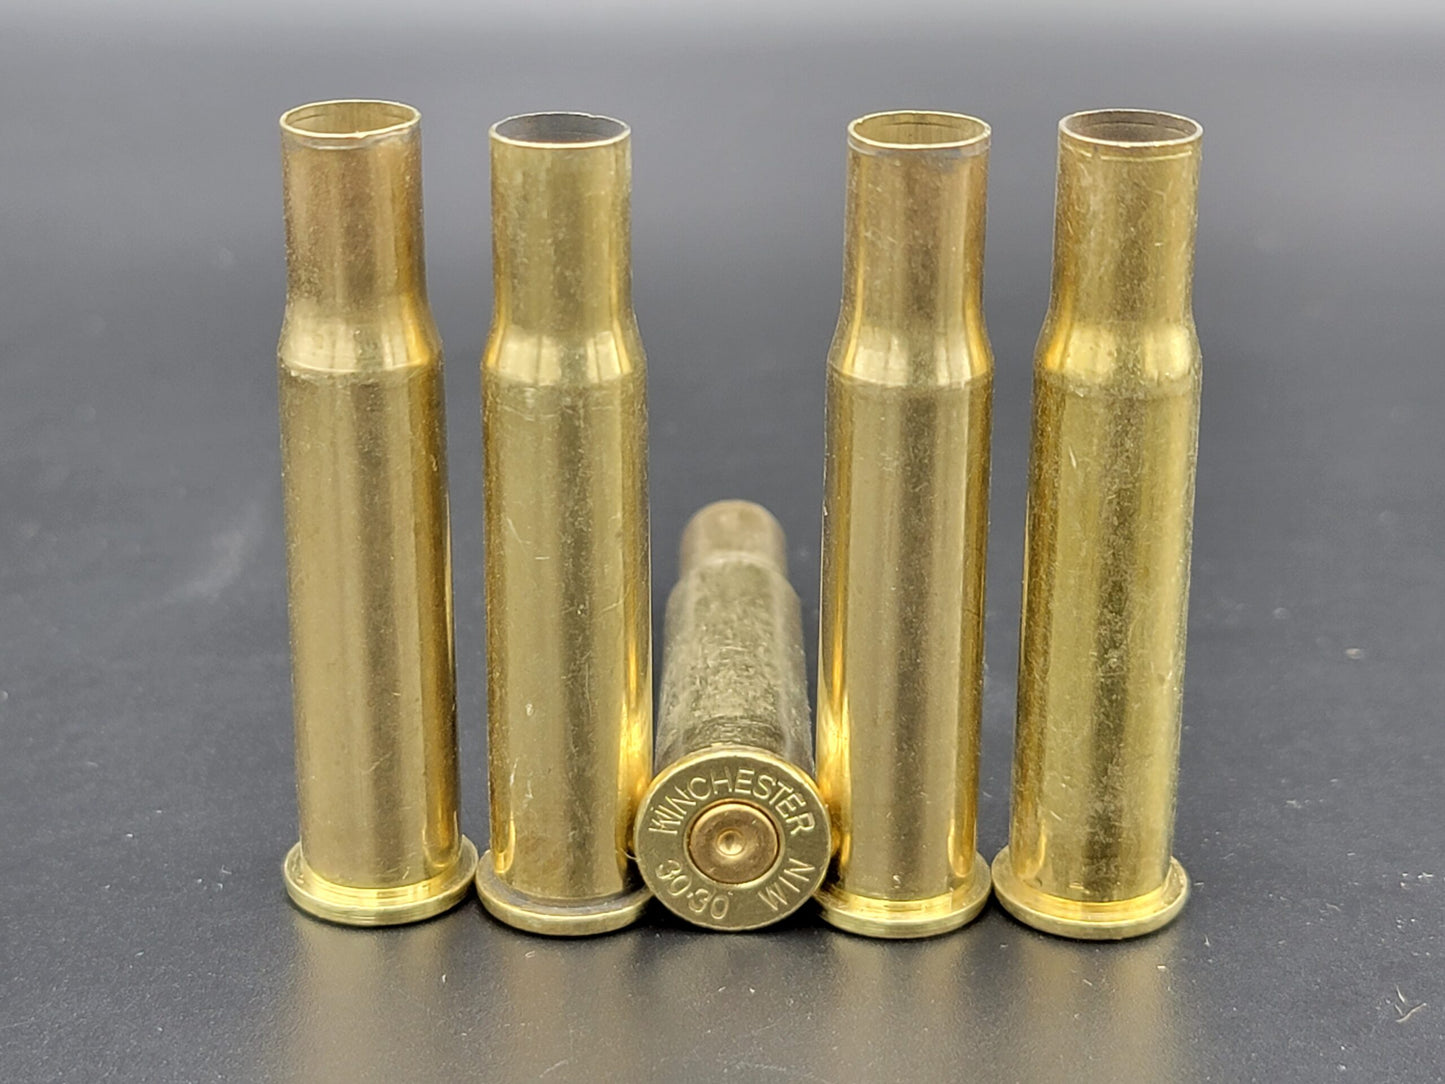 30-30 once fired rifle brass. Hand sorted from reputable indoor/military ranges for reloading. Reliable spent casings for precision shooting.